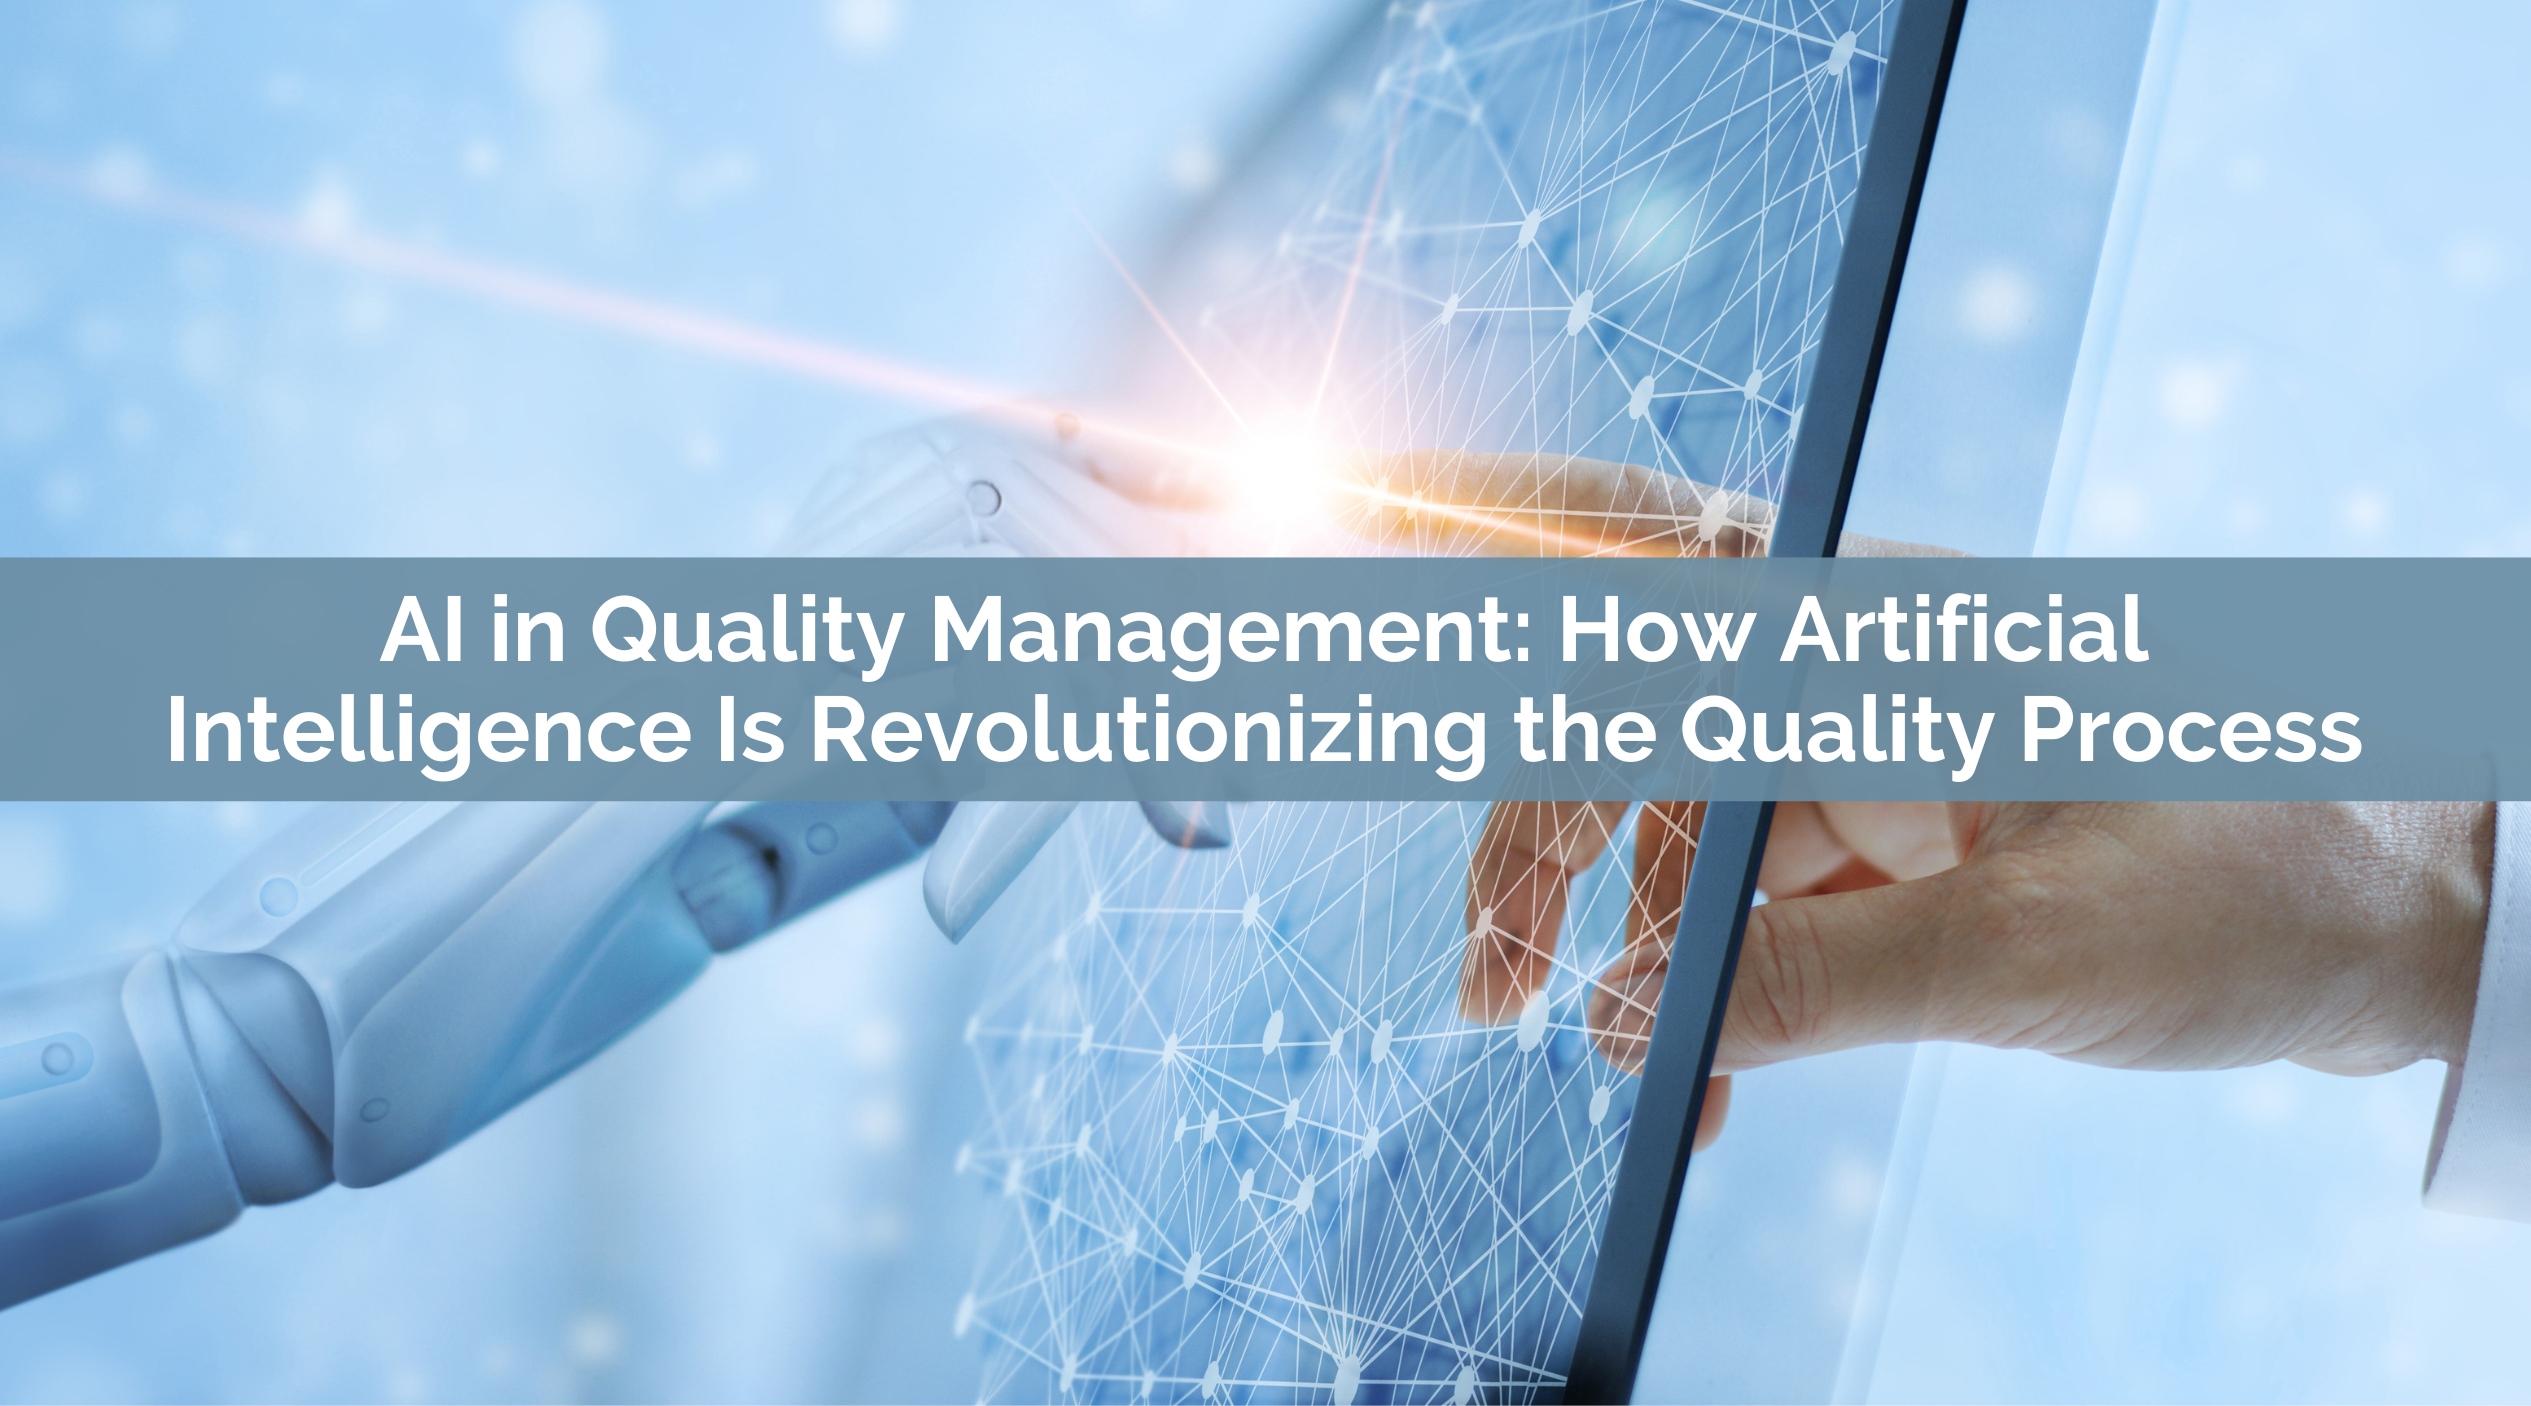 AI in Quality Management: How Artificial Intelligence Is Revolutionizing the Quality Process